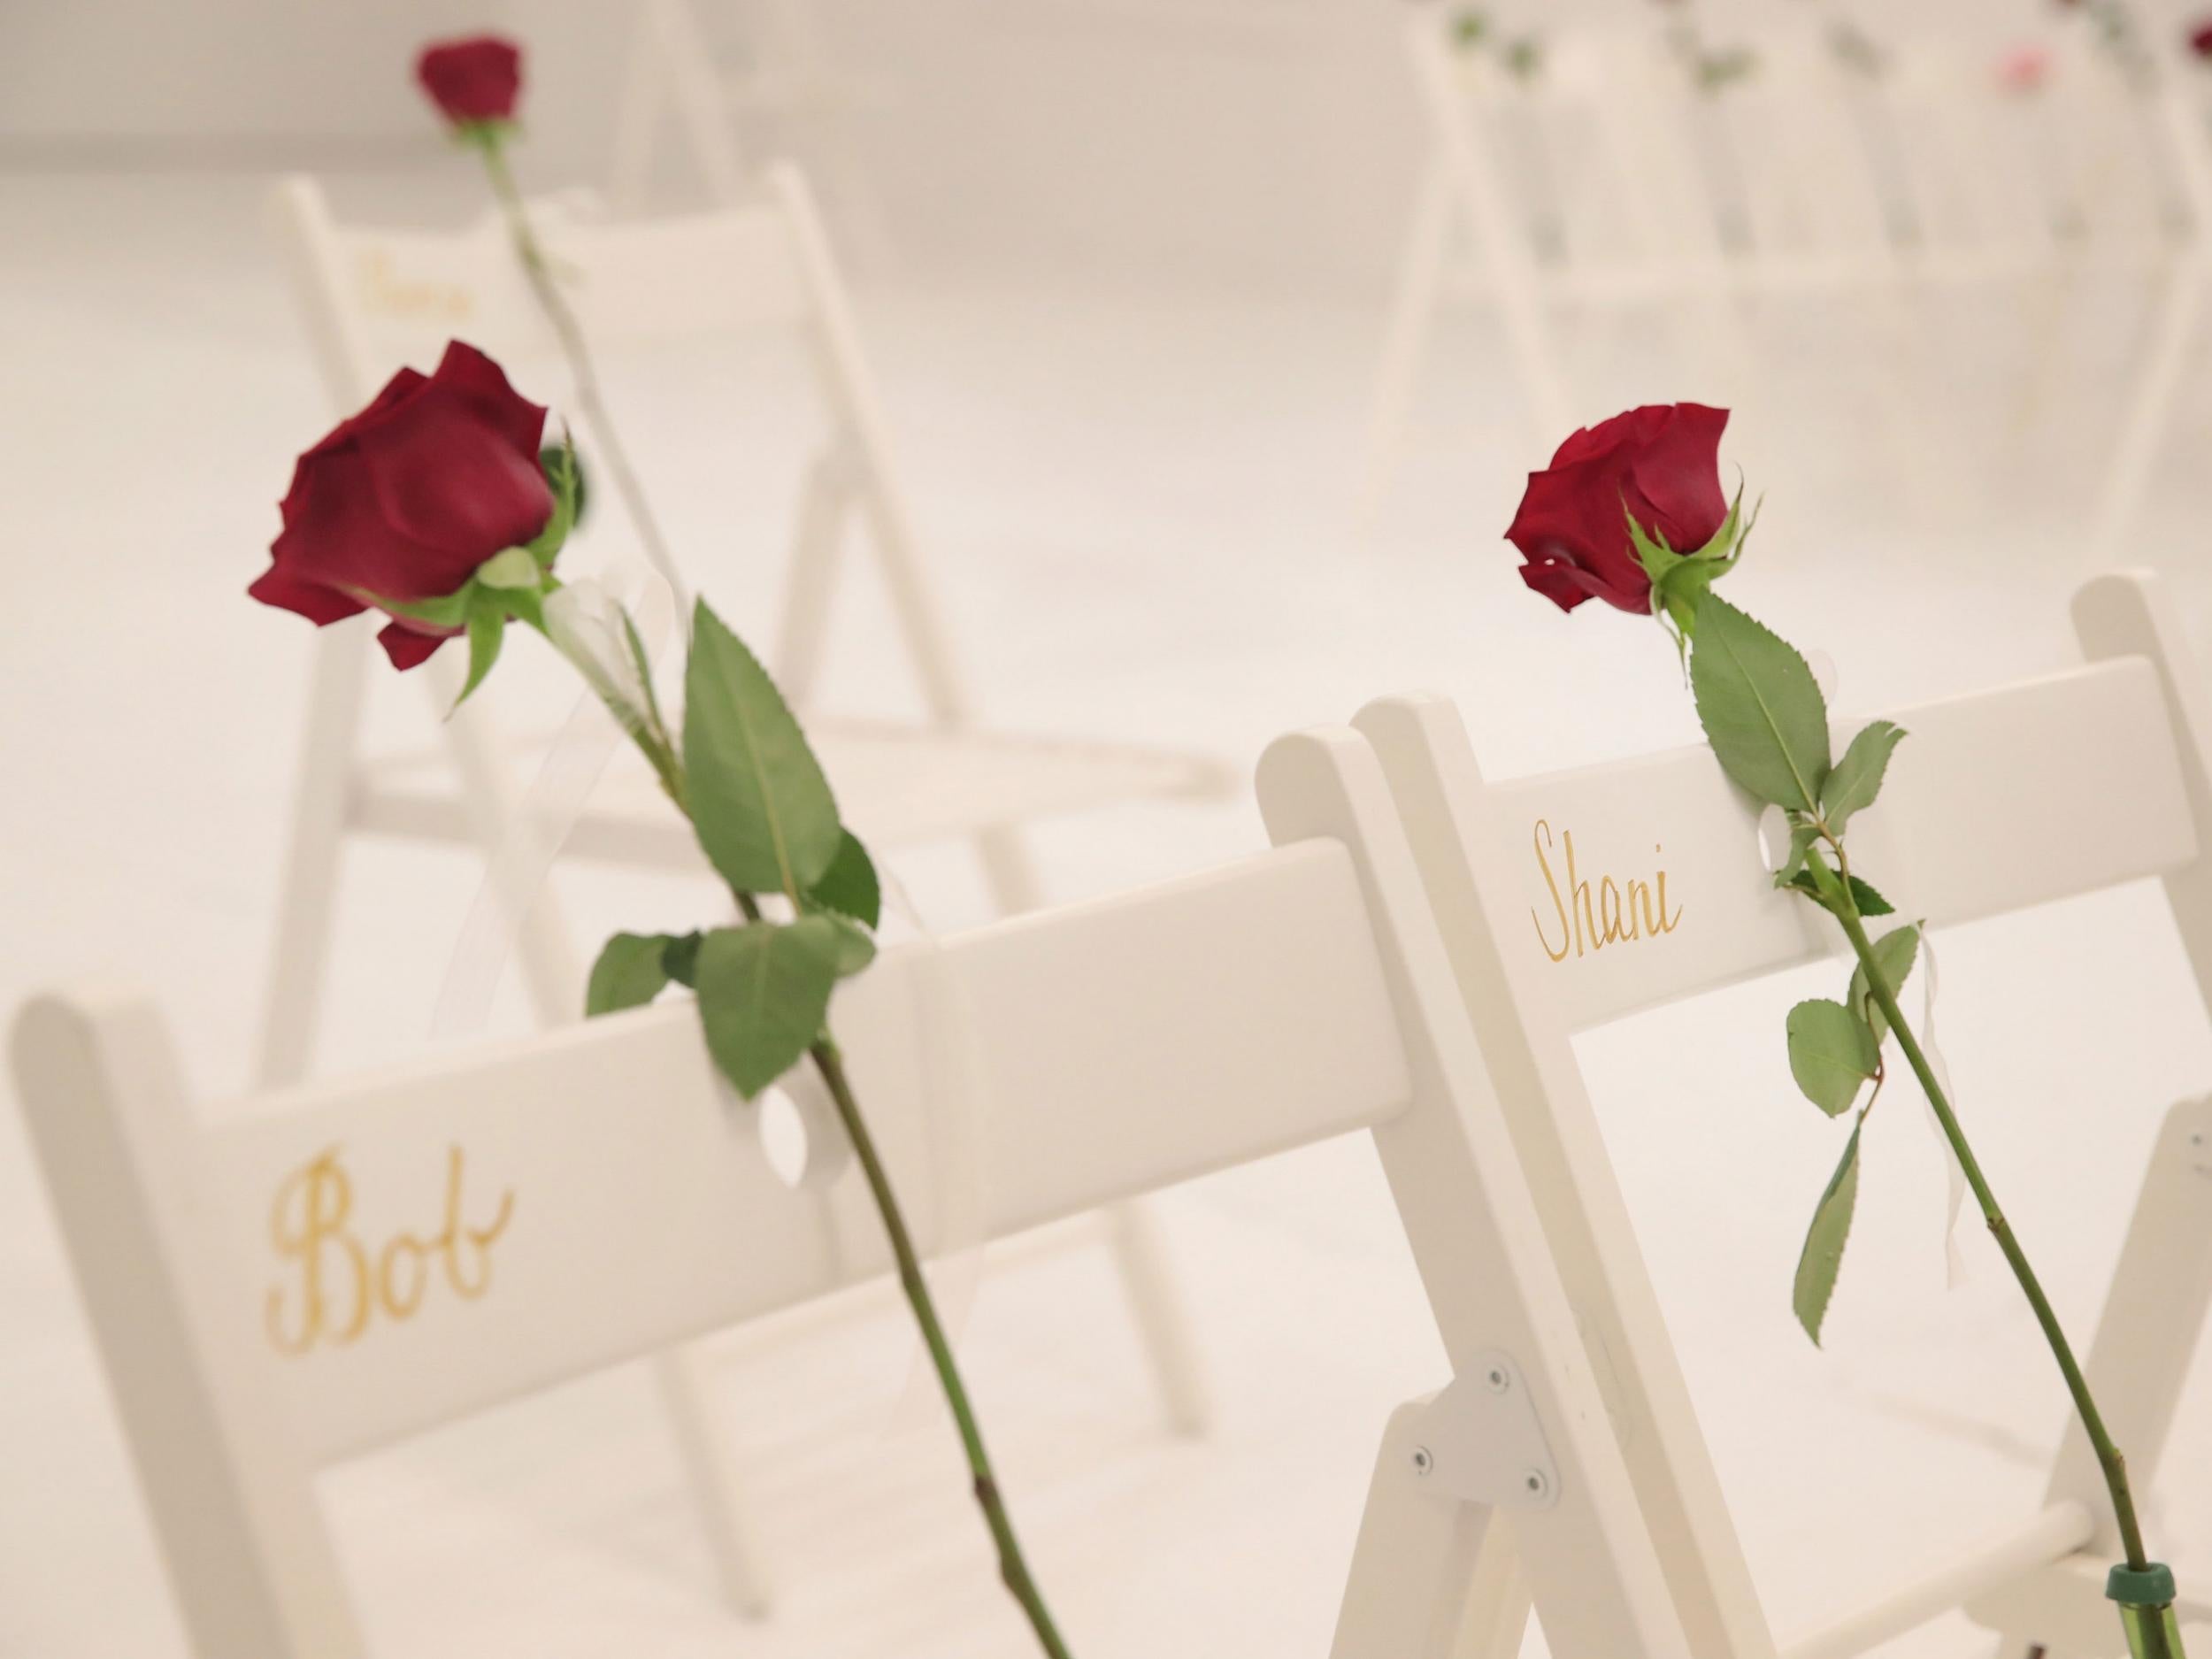 On each chair is a single rose and the name of a shooting victim